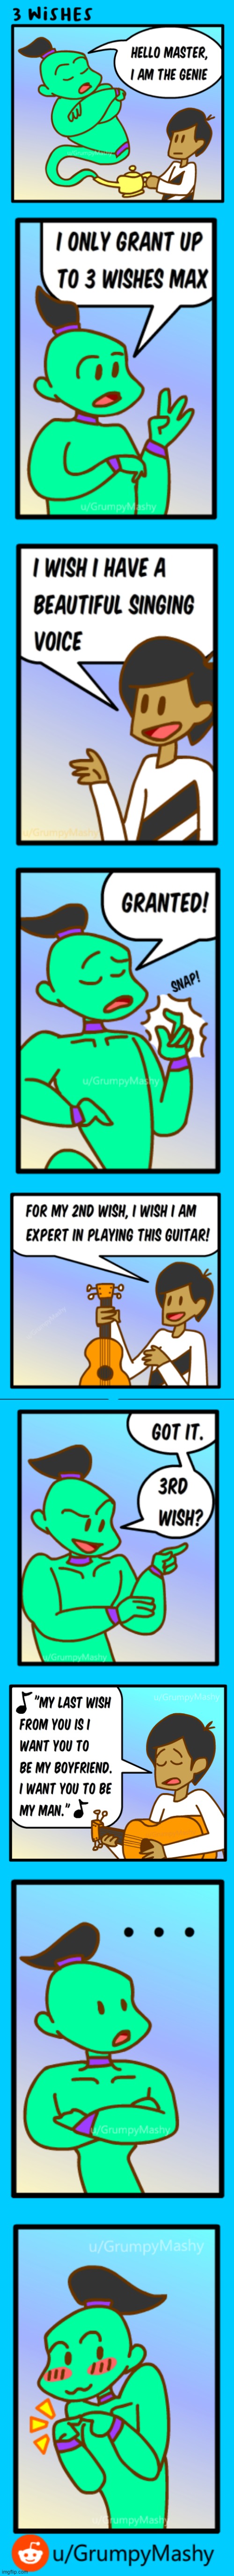 Wishes well spent. | image tagged in memes,funny,adorable,wholesome,genie,comics/cartoons | made w/ Imgflip meme maker